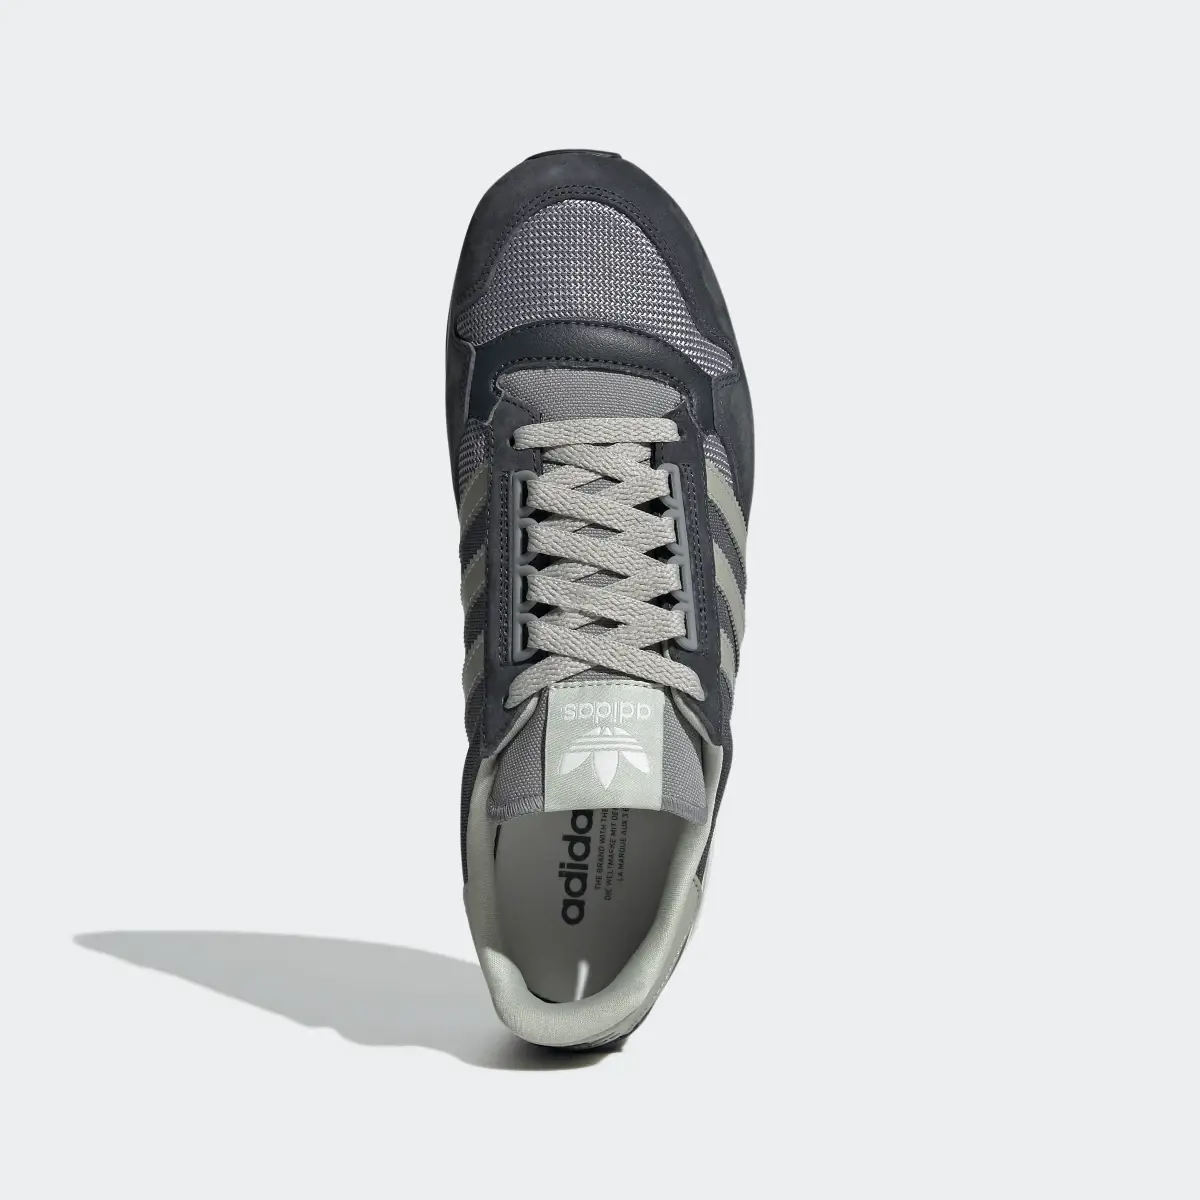 Adidas ZX 500 Shoes. 3